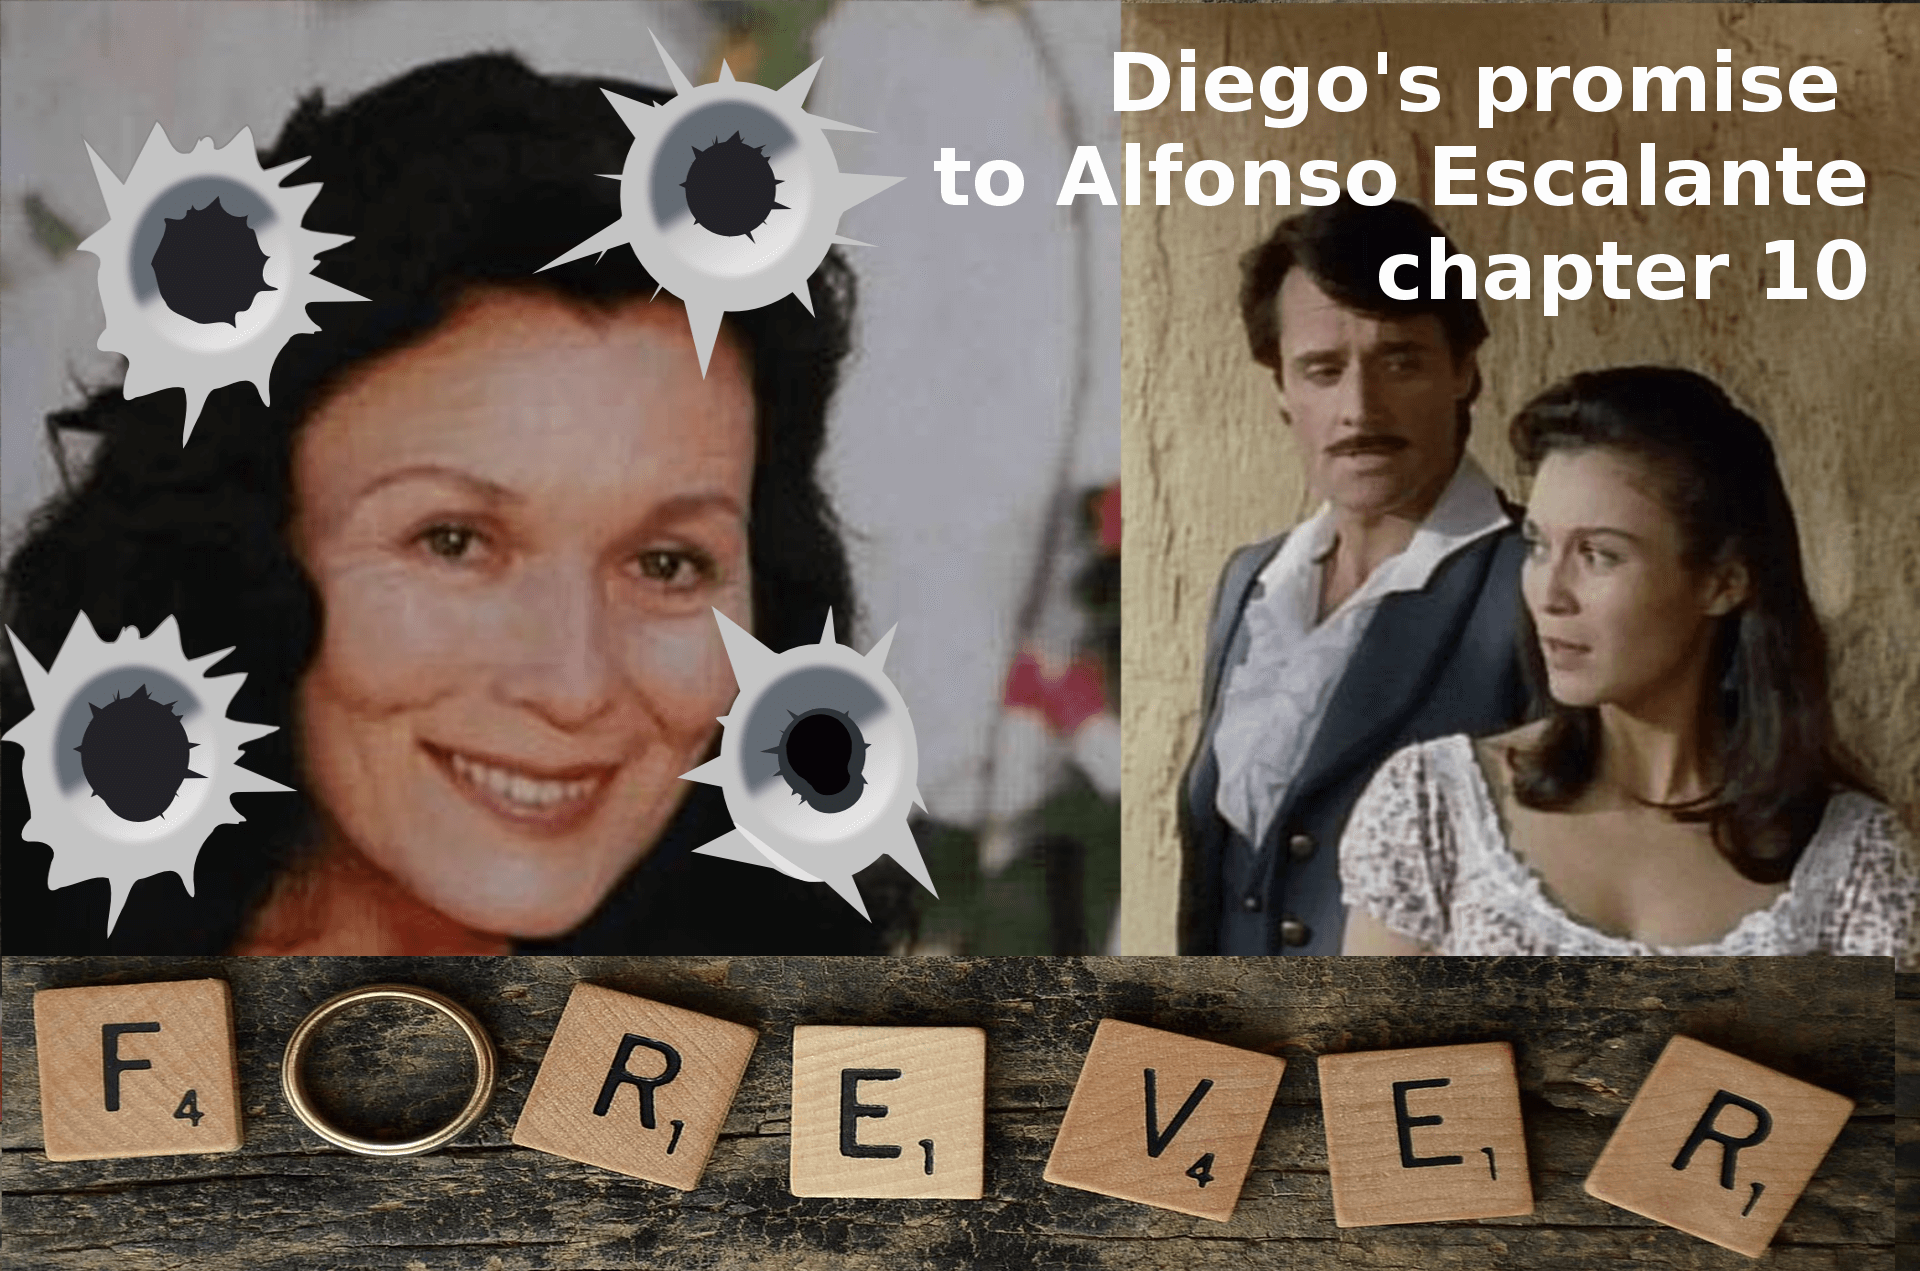 Diego's promise to Alfonso Escalante – chapter 10 Zorro fanfiction